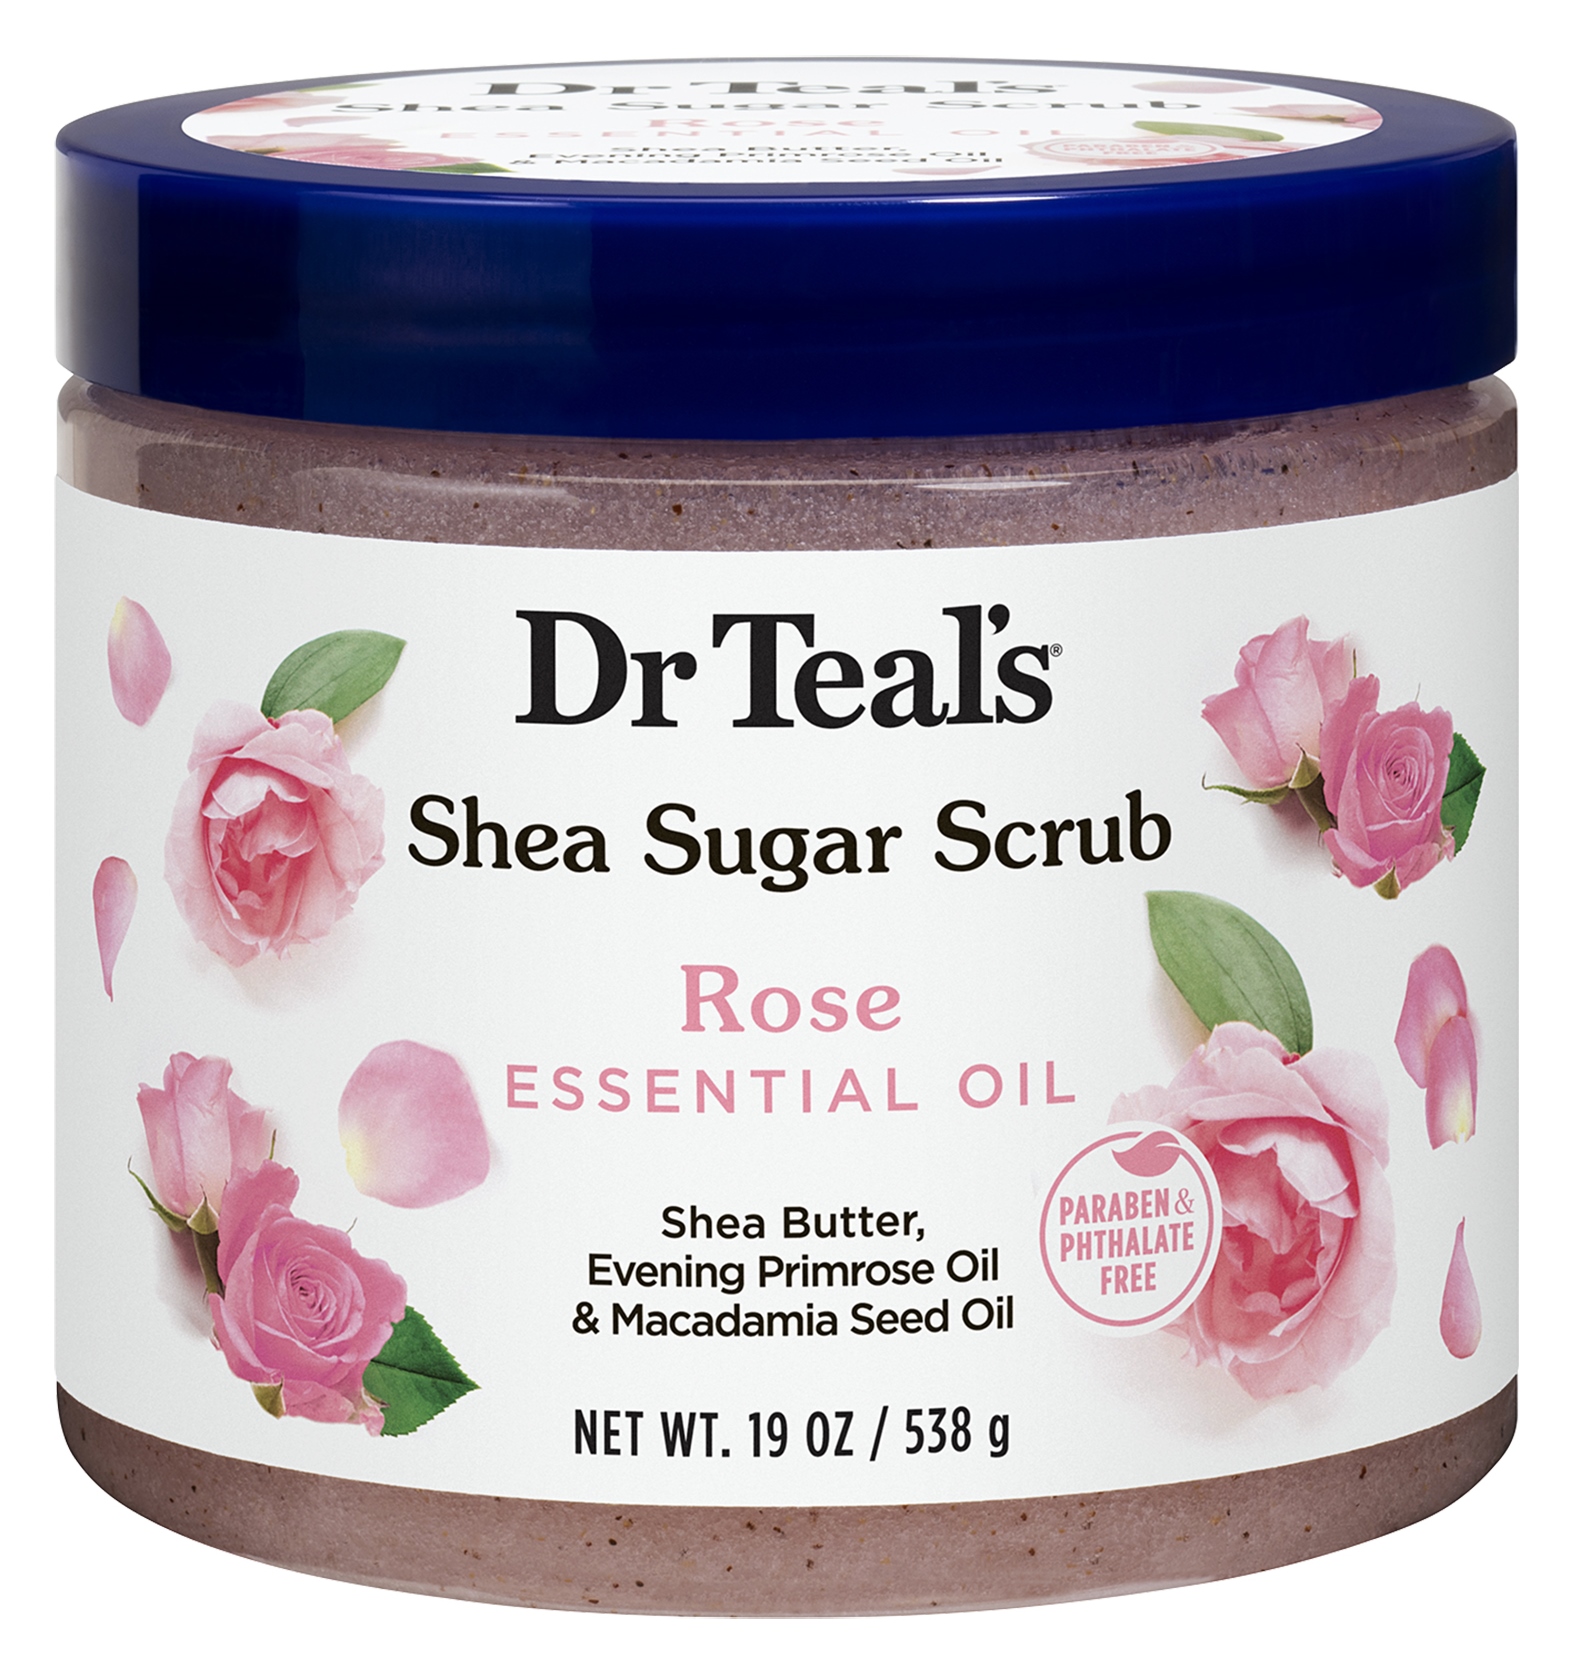 You'll Love These Galentine’s and Valentine’s Day Gifts Under $10 - Dr. Teal’s Shea Sugar Body Scrub, Rose Essential Oils